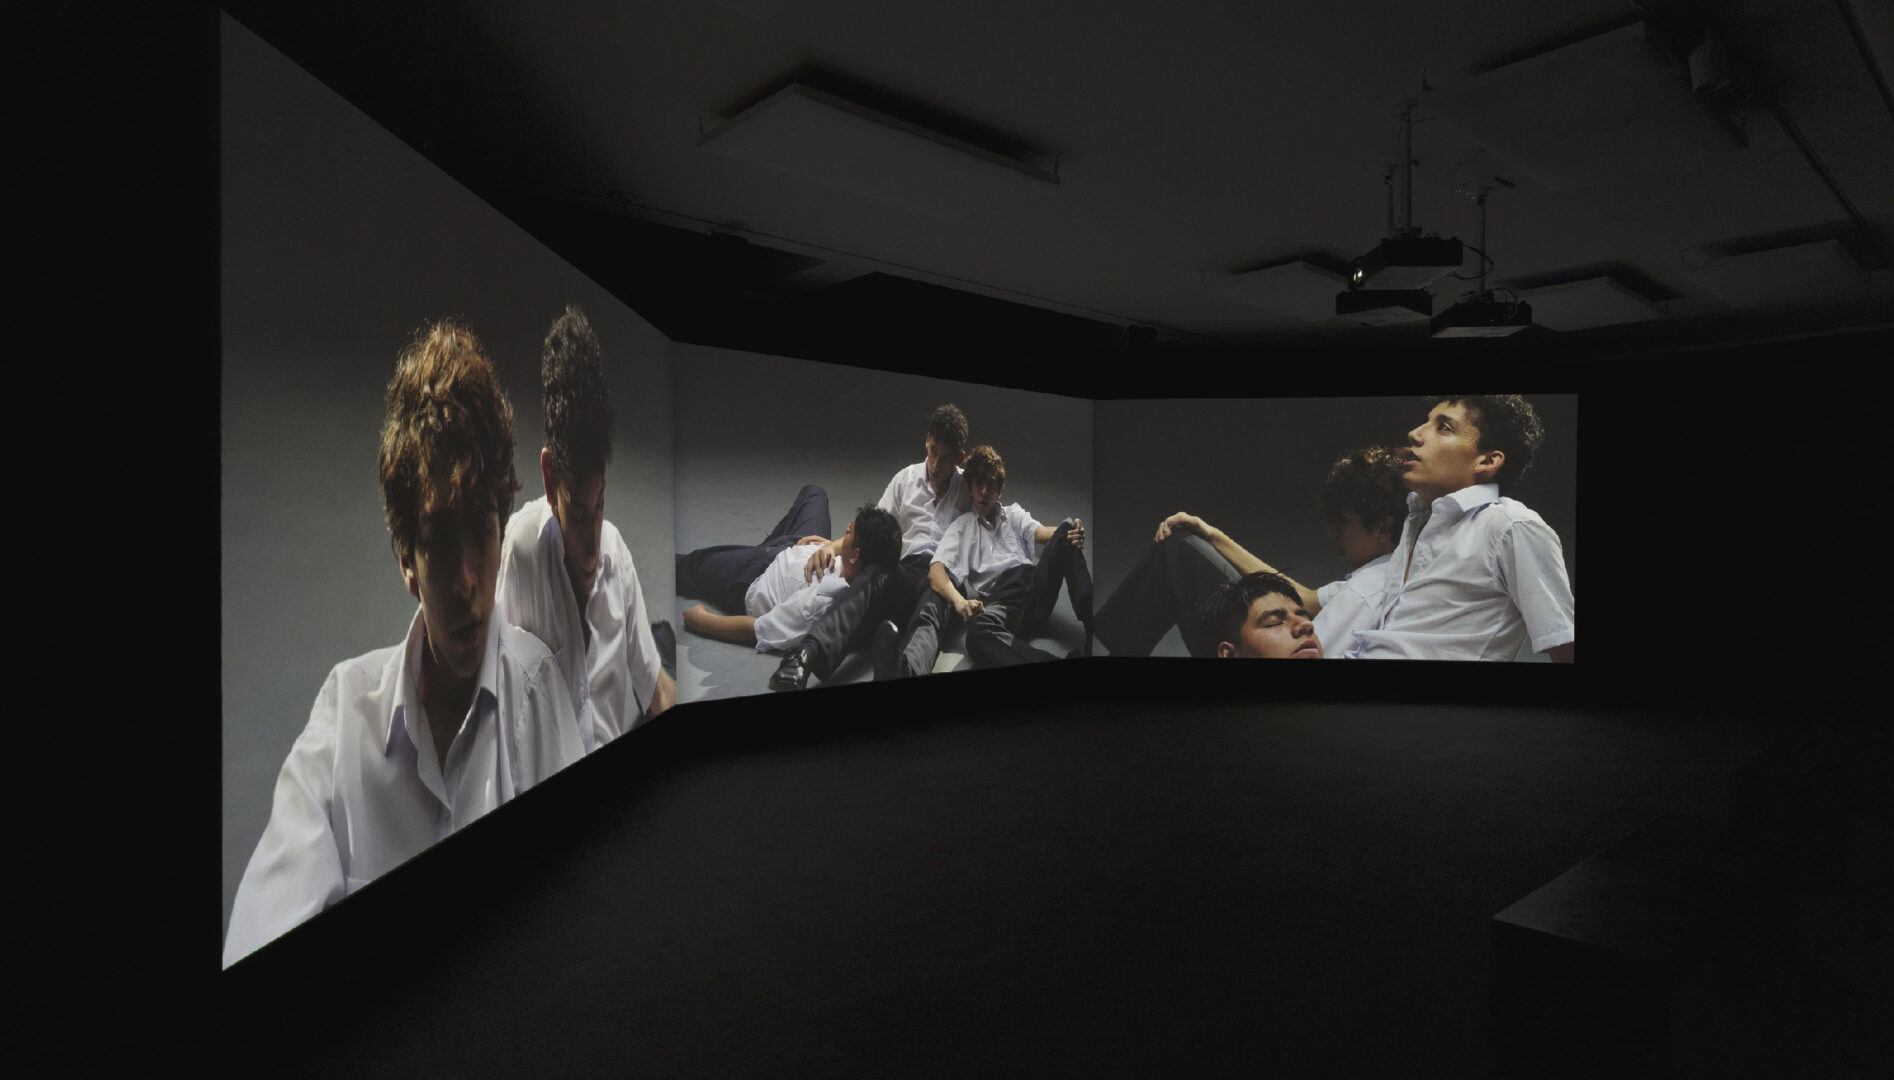 Multiple large screens displaying images of peoeple in white suits.